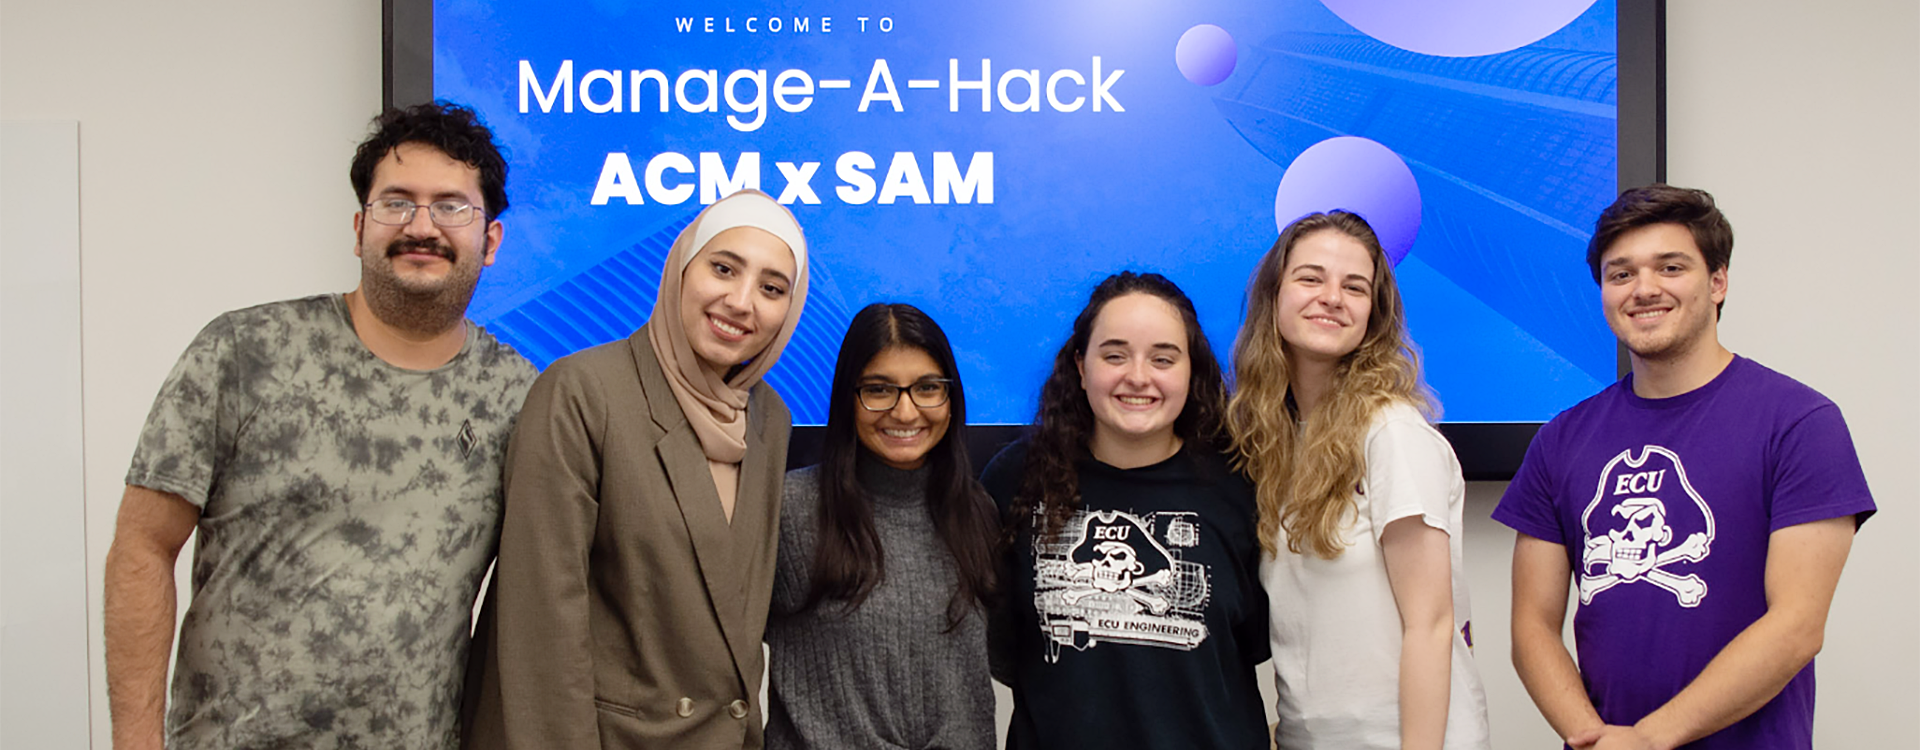 Students with ECU's chapters of the Association for Computing Machinery and the Society for Advancement of Management came together for Manage-A-Hack, an event that has garnered some international attention. (Contributed photo)